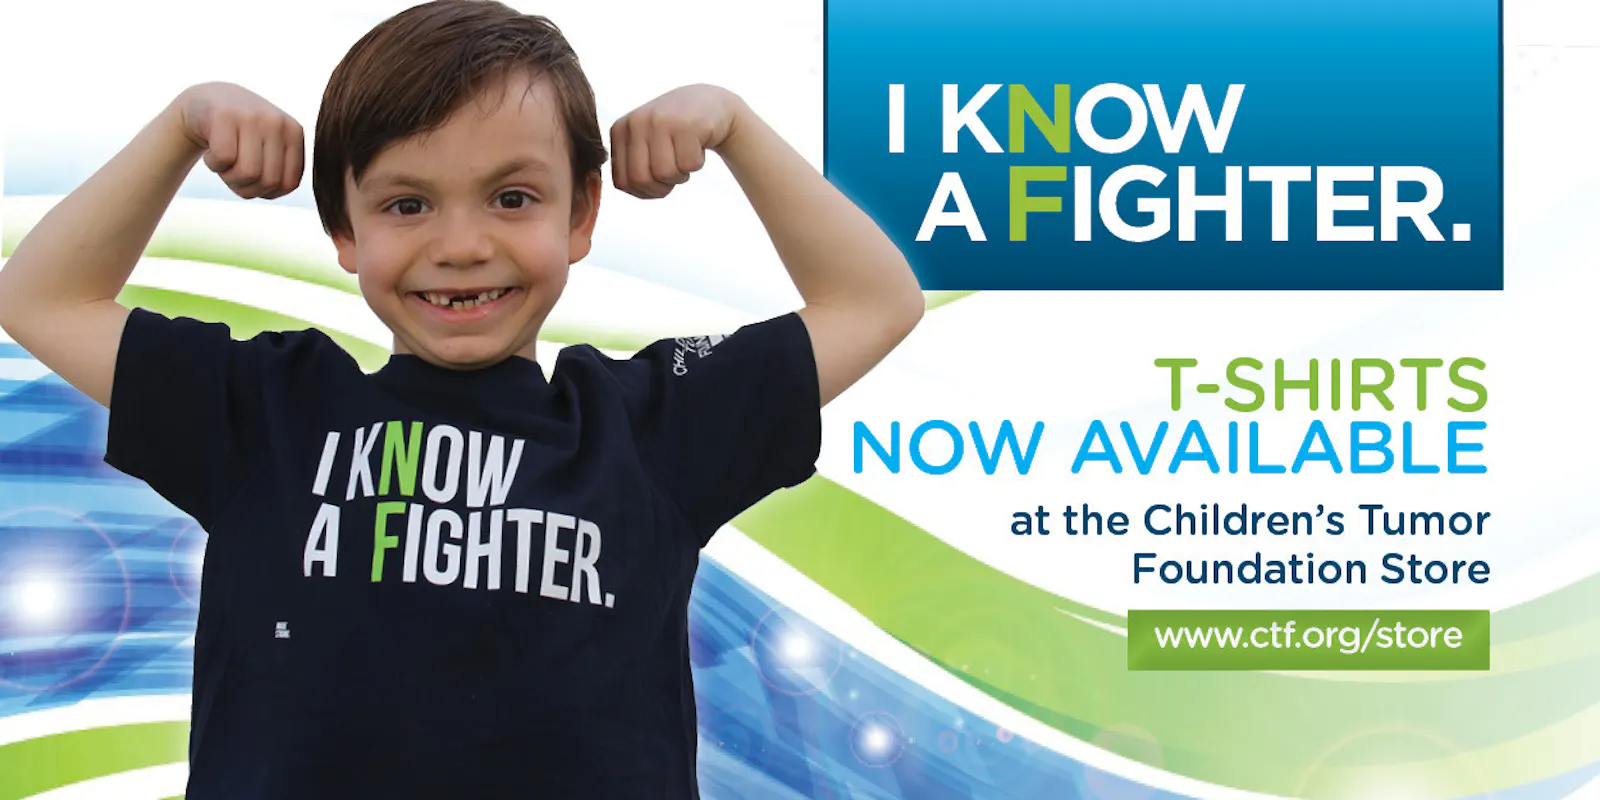 I Know A Fighter T-Shirt - image2